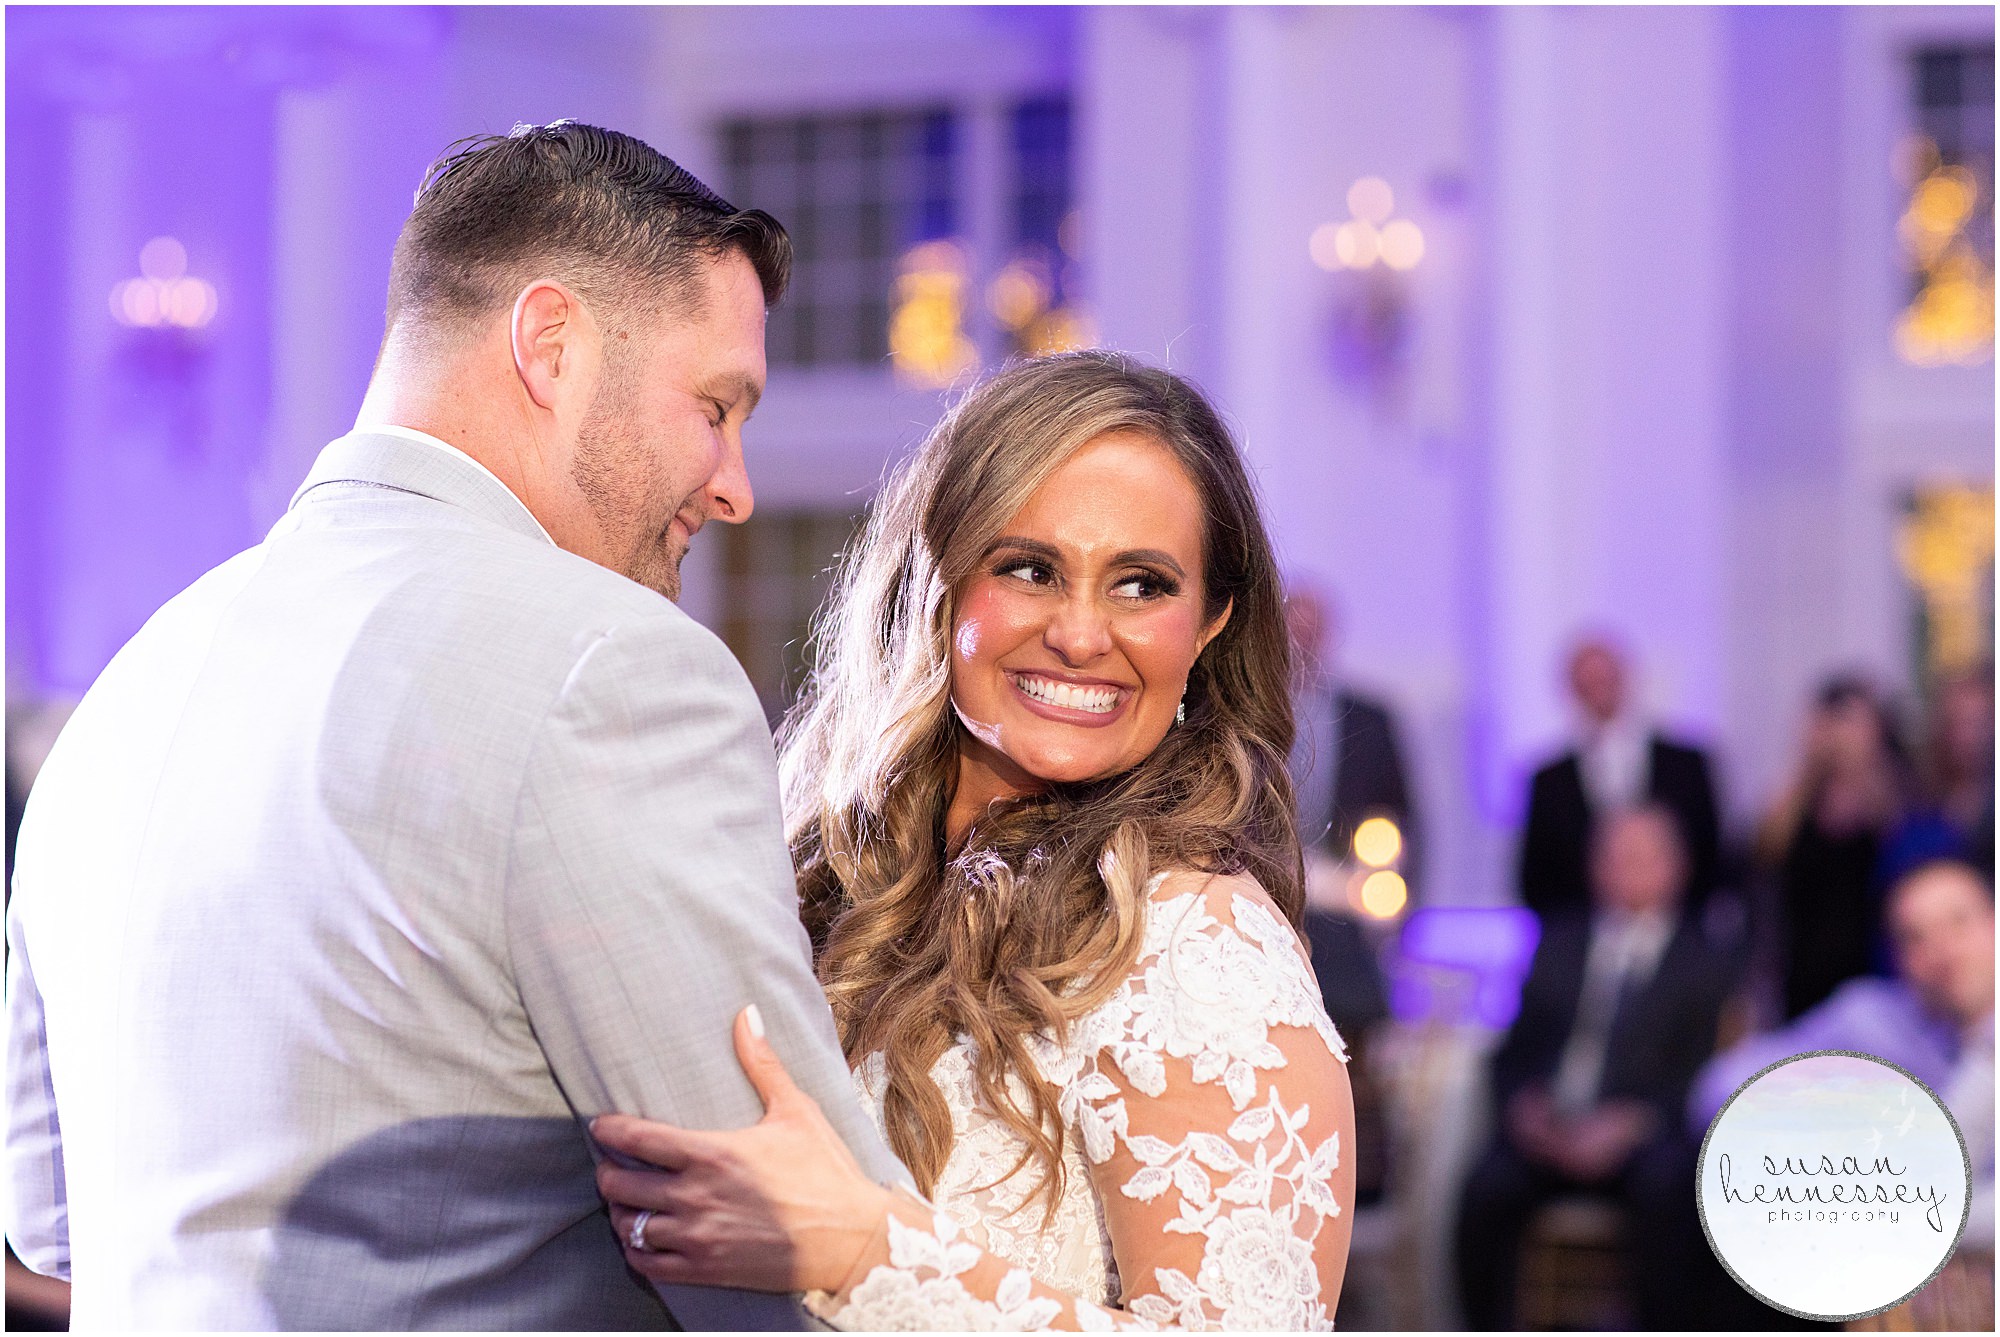 Bride and Groom share their first dance at their Park Chateau wedding